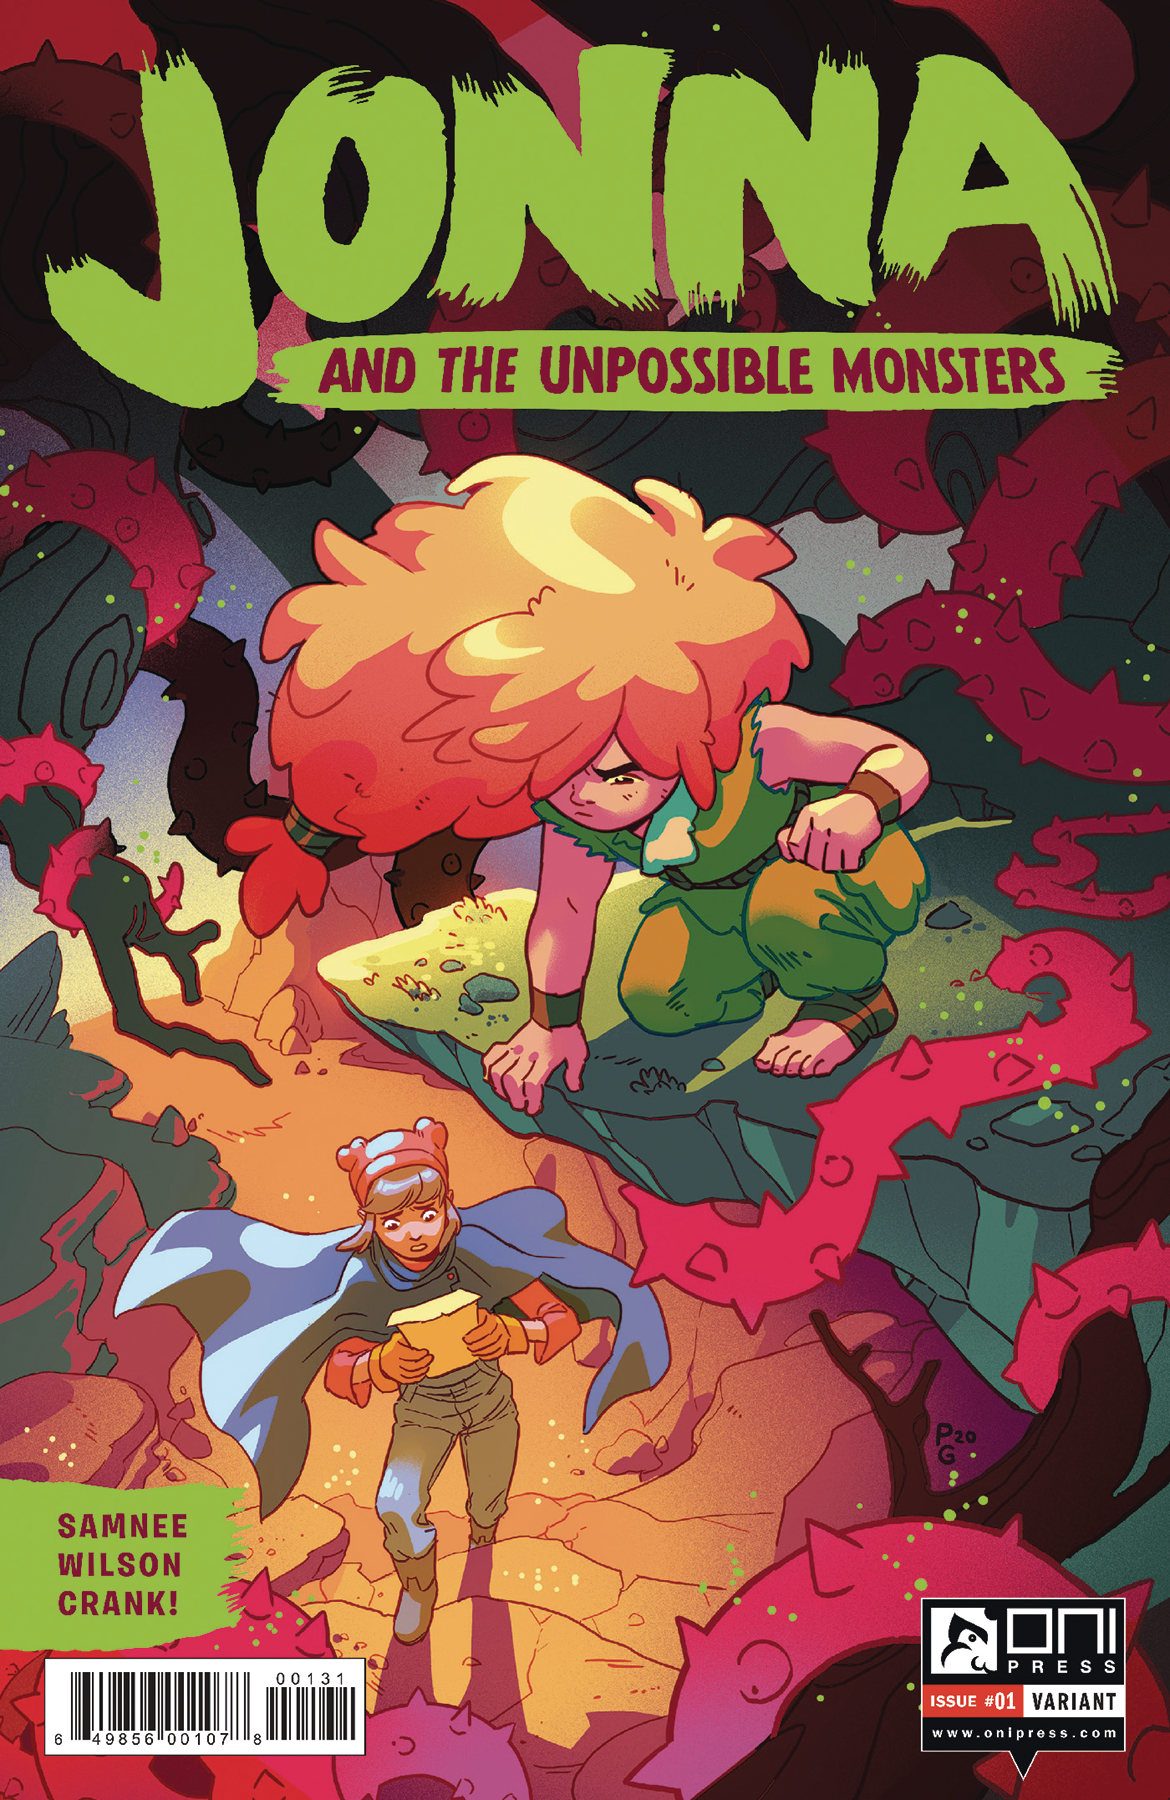 Jonna and the Unpossible Monsters #1 Cover C 1 for 10 Incentive 